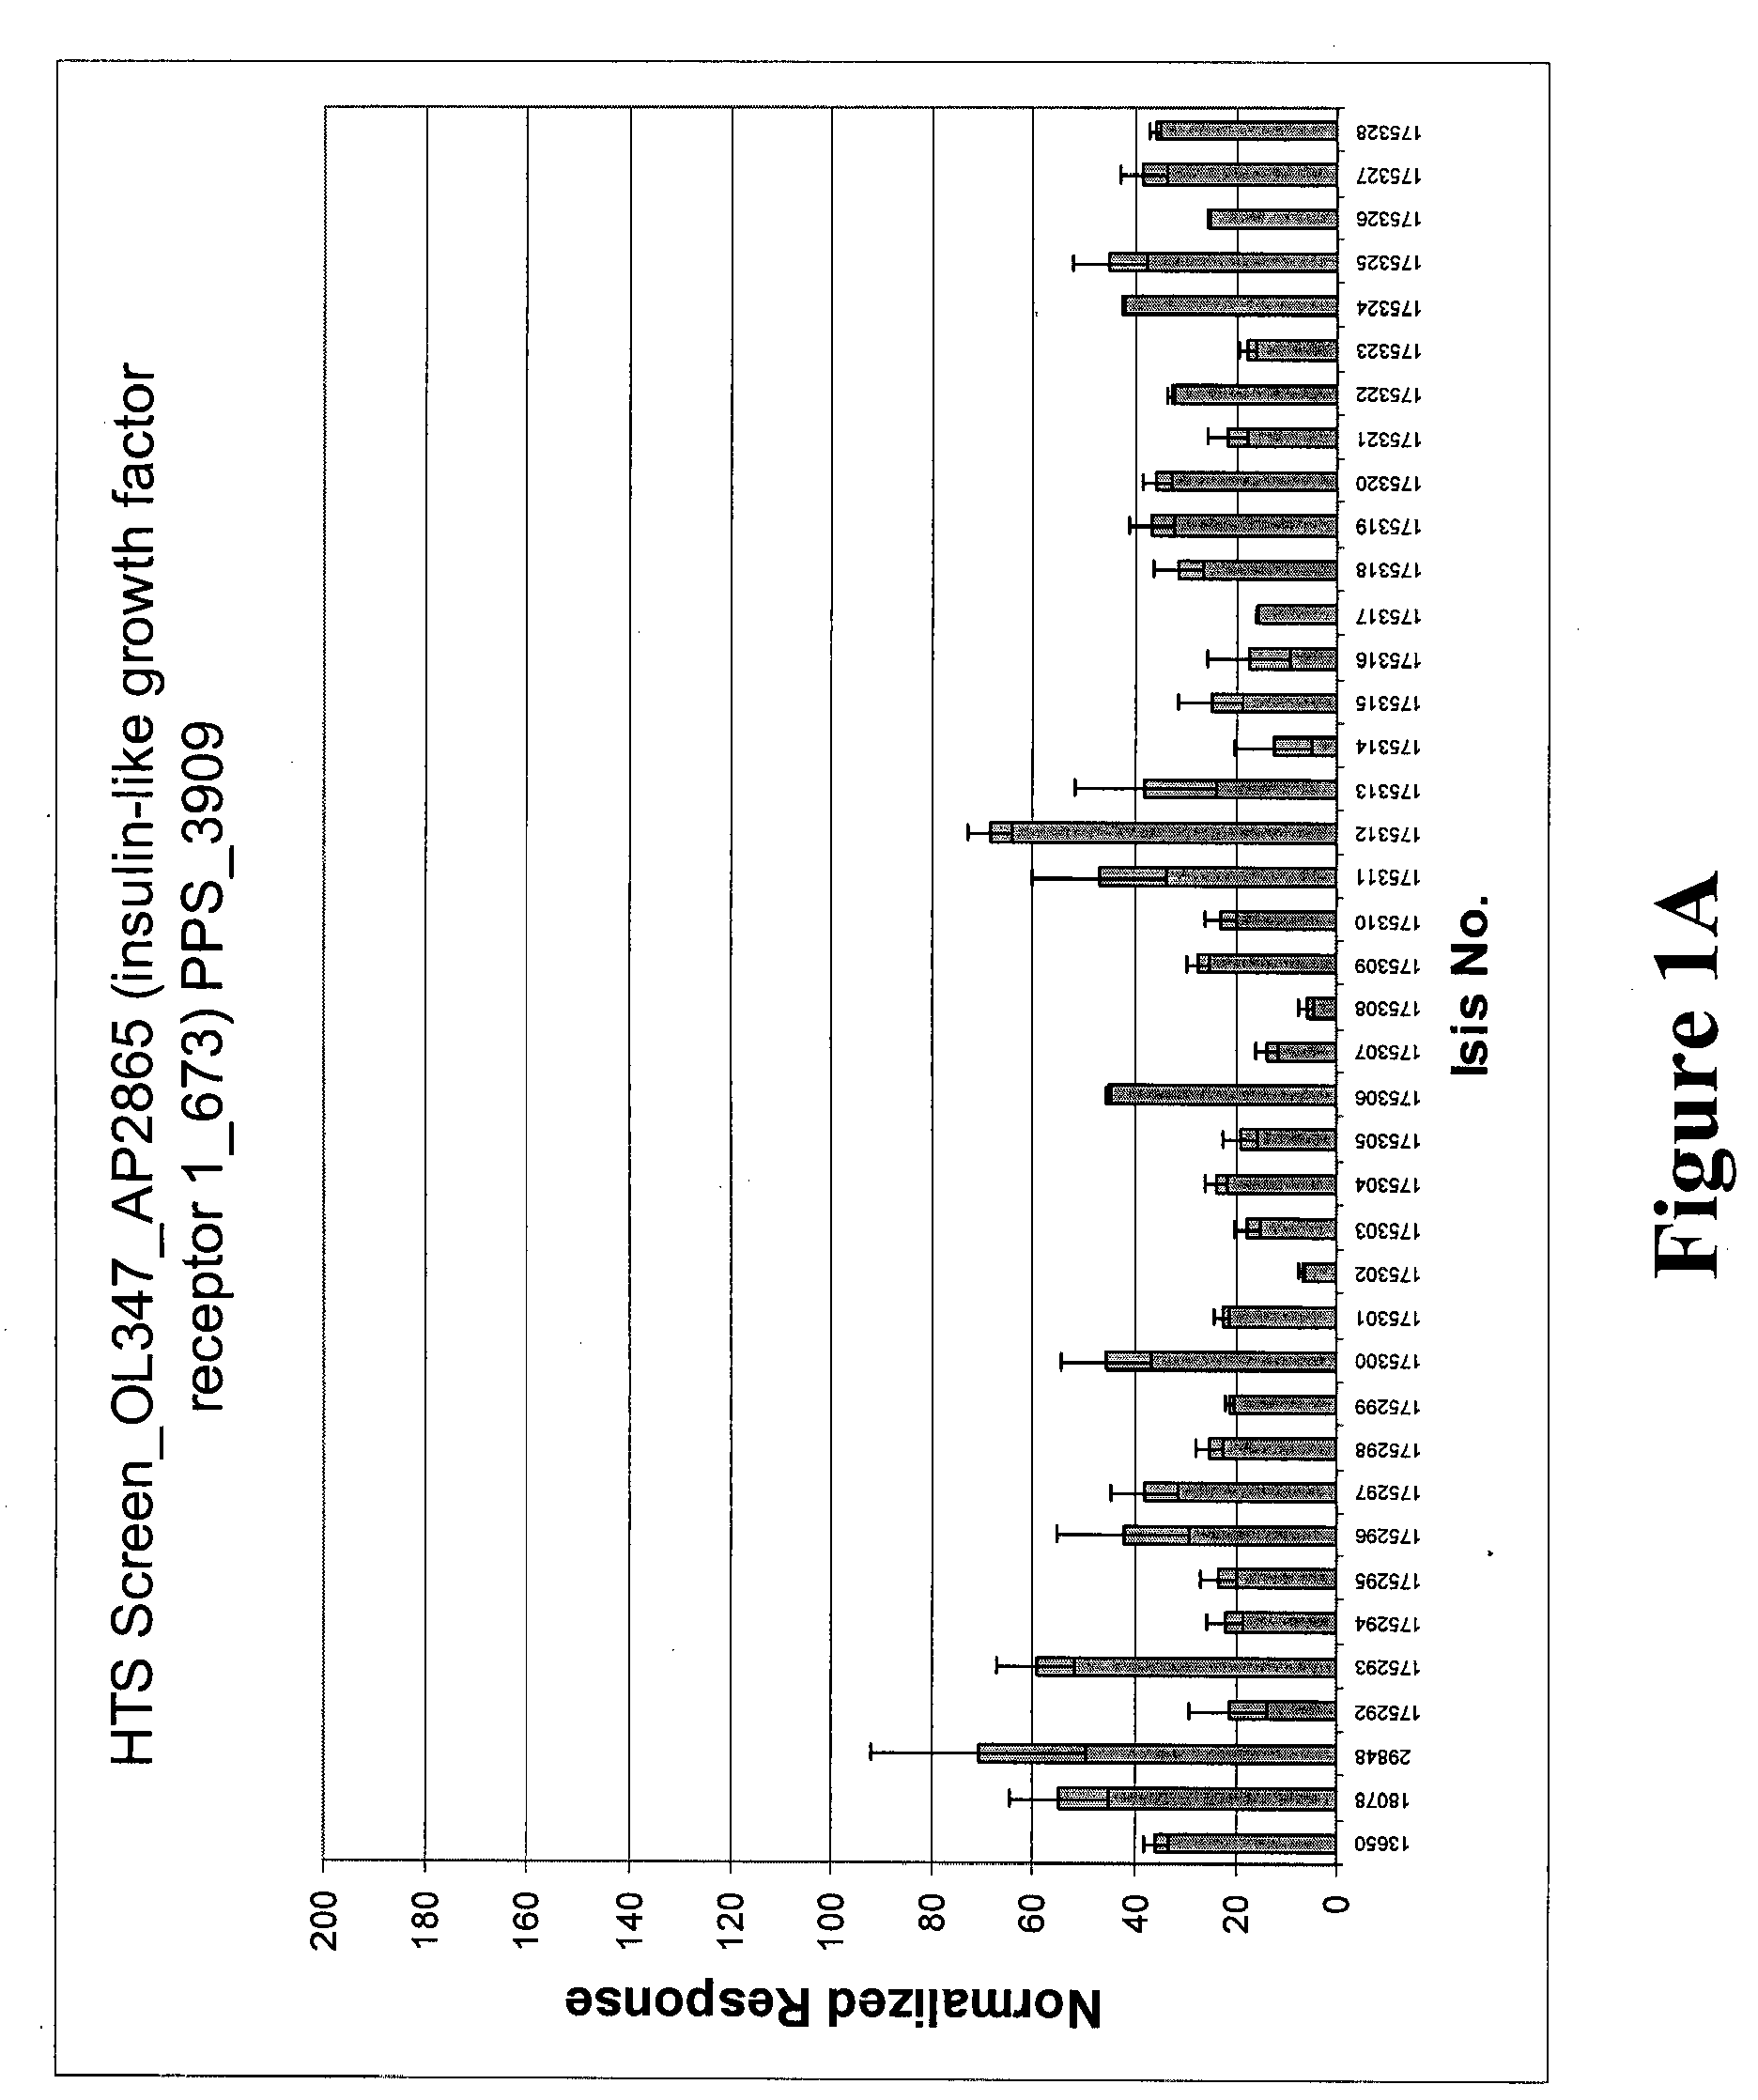 Modulation of insulin like growth factor i receptor expression